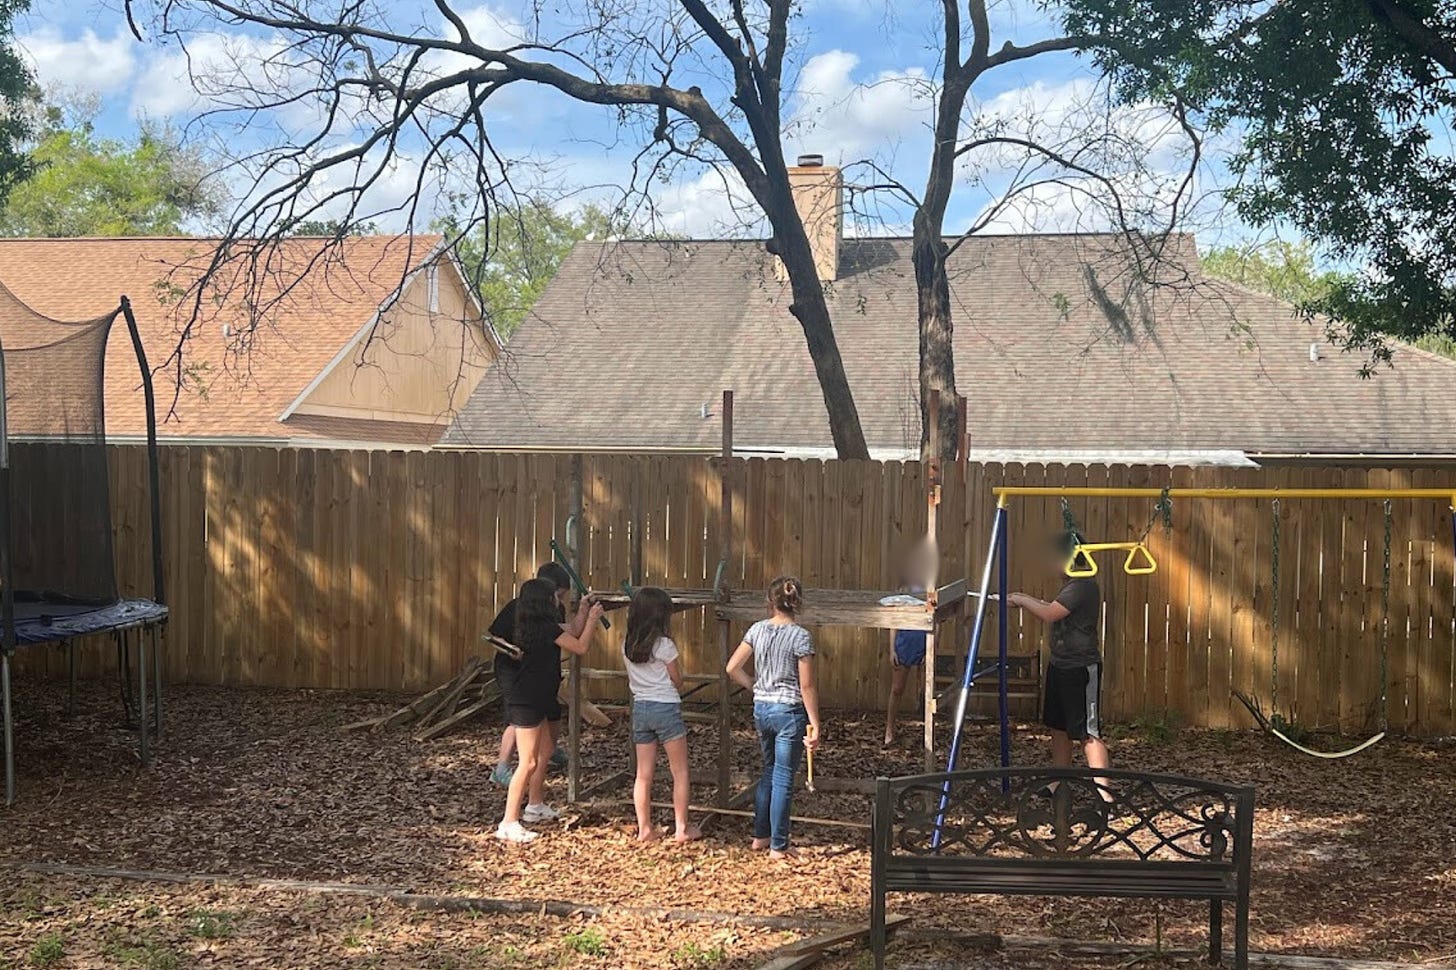  This image shows a group of children in a backyard engaged in what appears to be a group activity. They are surrounded by leafy trees, with residential houses in the background. One child in a dark top and shorts stands on a blue stool or ladder, seemingly reaching up towards something not visible in the picture, while another in a black shirt is close by, looking towards the first child. Three other children are to the right, with two of them looking at a piece of wood one of them is holding. Leaves and wood debris cover the ground, and there are elements of a playground, like swings, visible.